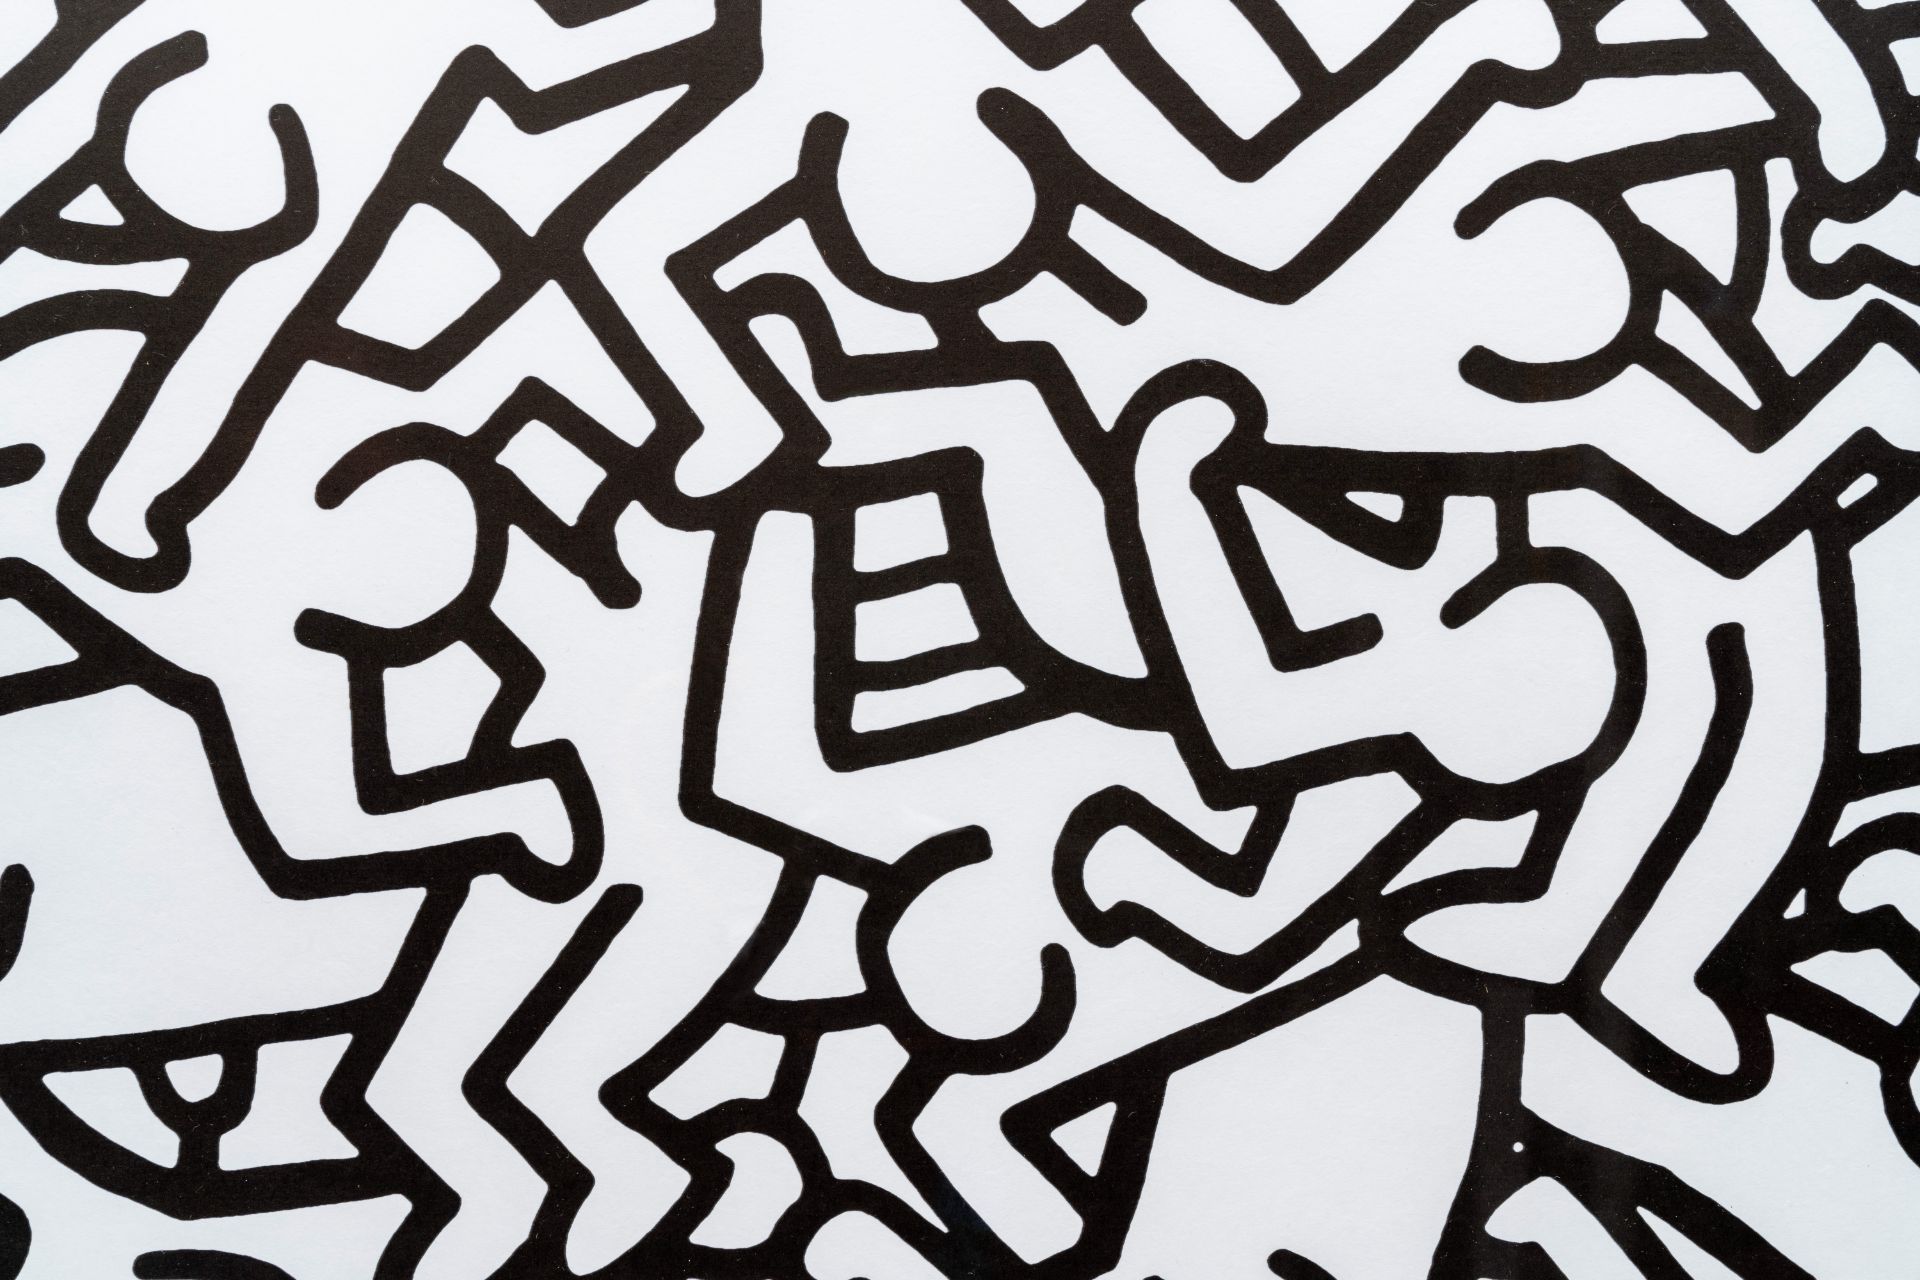 Keith Haring (1958-1990, after): 'Party of life invitation', serigraph, 122/200 - Image 6 of 6